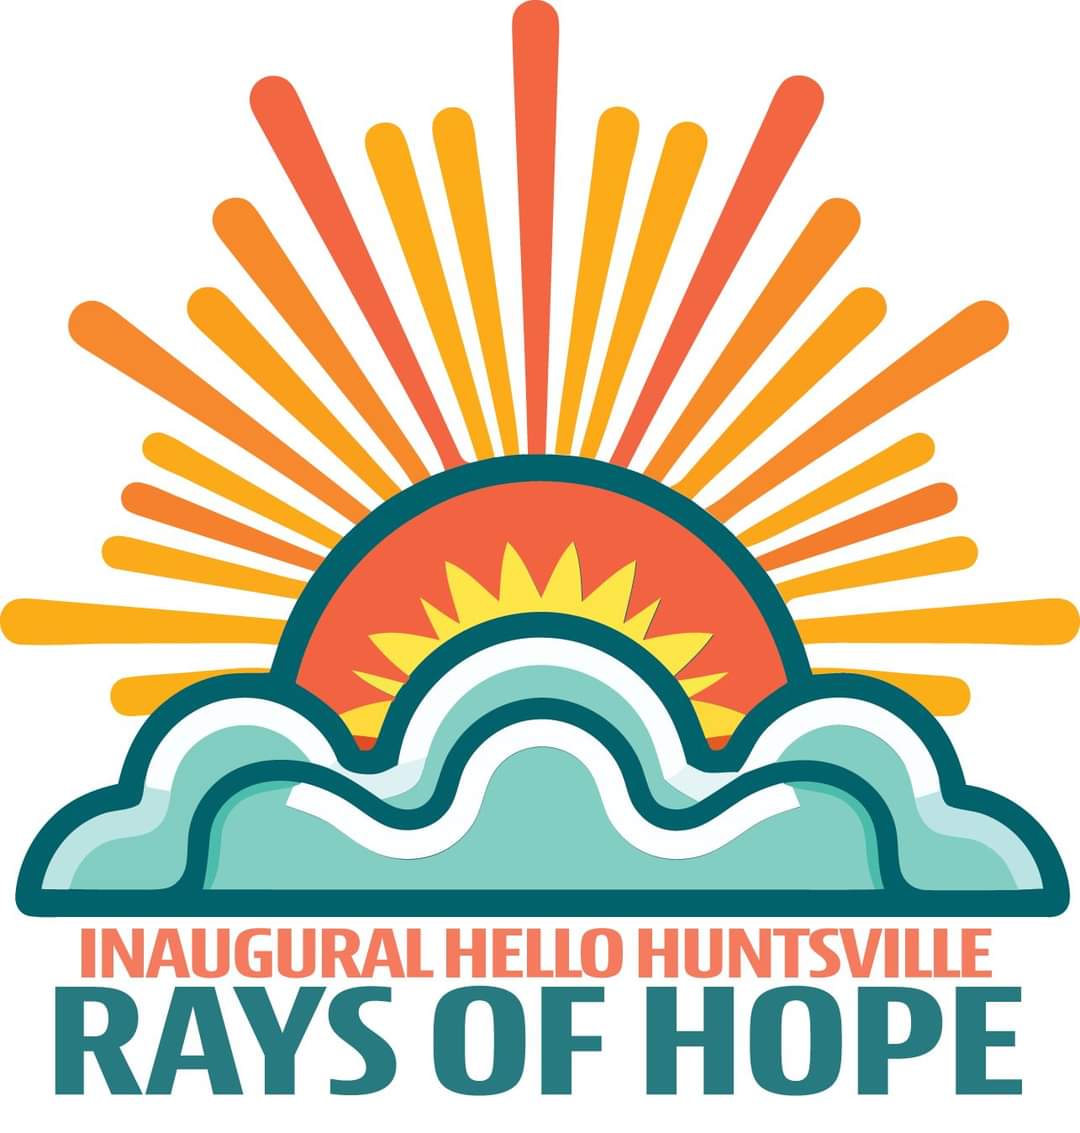 Stay tuned for how you can get involved with our Inaugural Hello Huntsville 'Rays of Hope' summer donation drive to benefit local non-profits coming this July. 

#CommUNITY #VisitHuntsvilleTX #HelloHuntsville